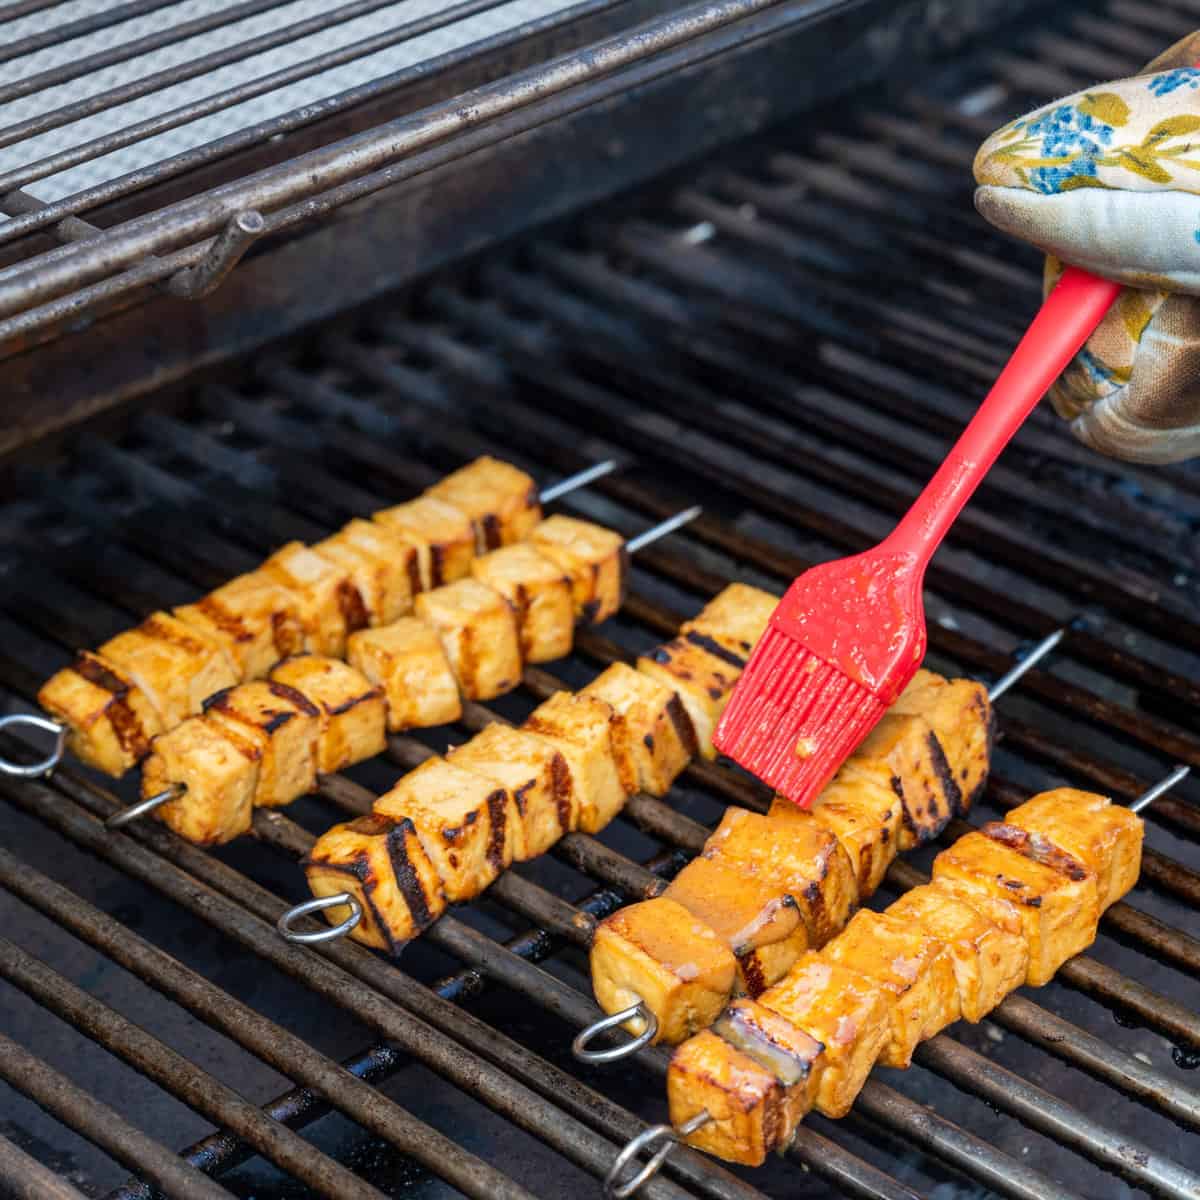 Brushing marinade onto grilled tofu skewers on an outdoor gas grill.